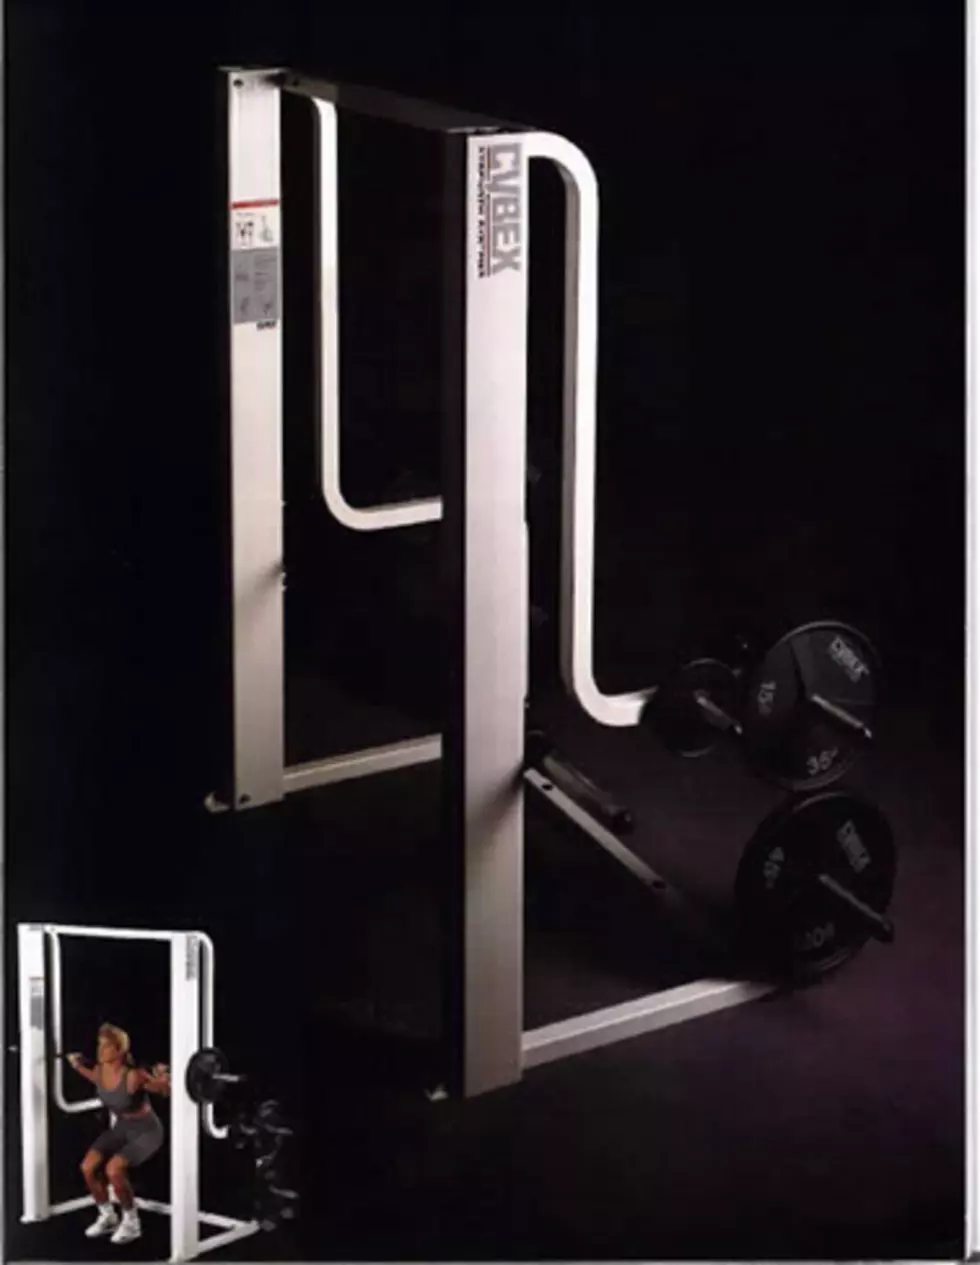 Owatonna-Based Business Recalling Weight-Lifting Equipment Due To Injuries